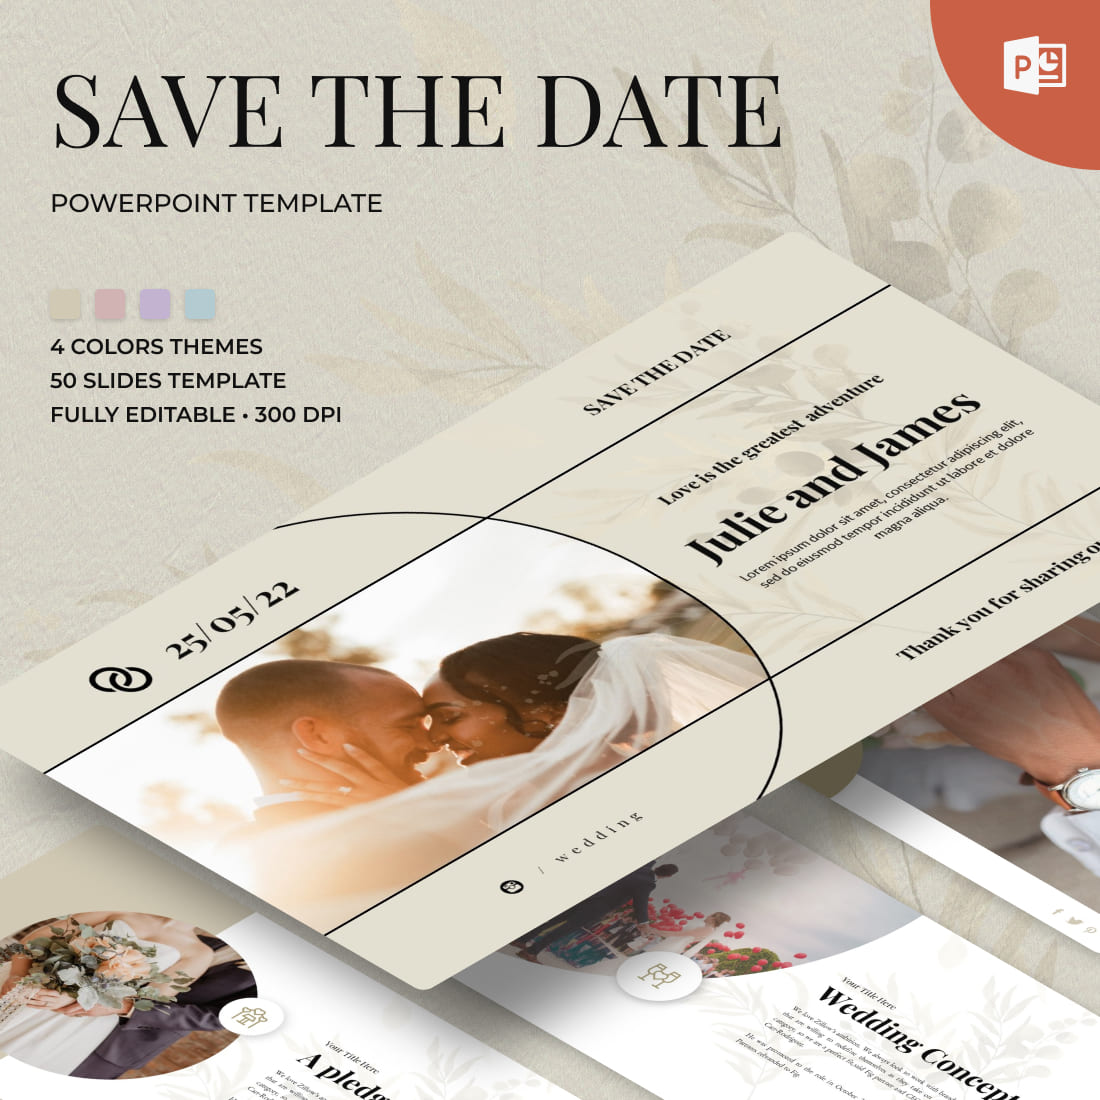 Save the Date Wedding Powerpoint Template.